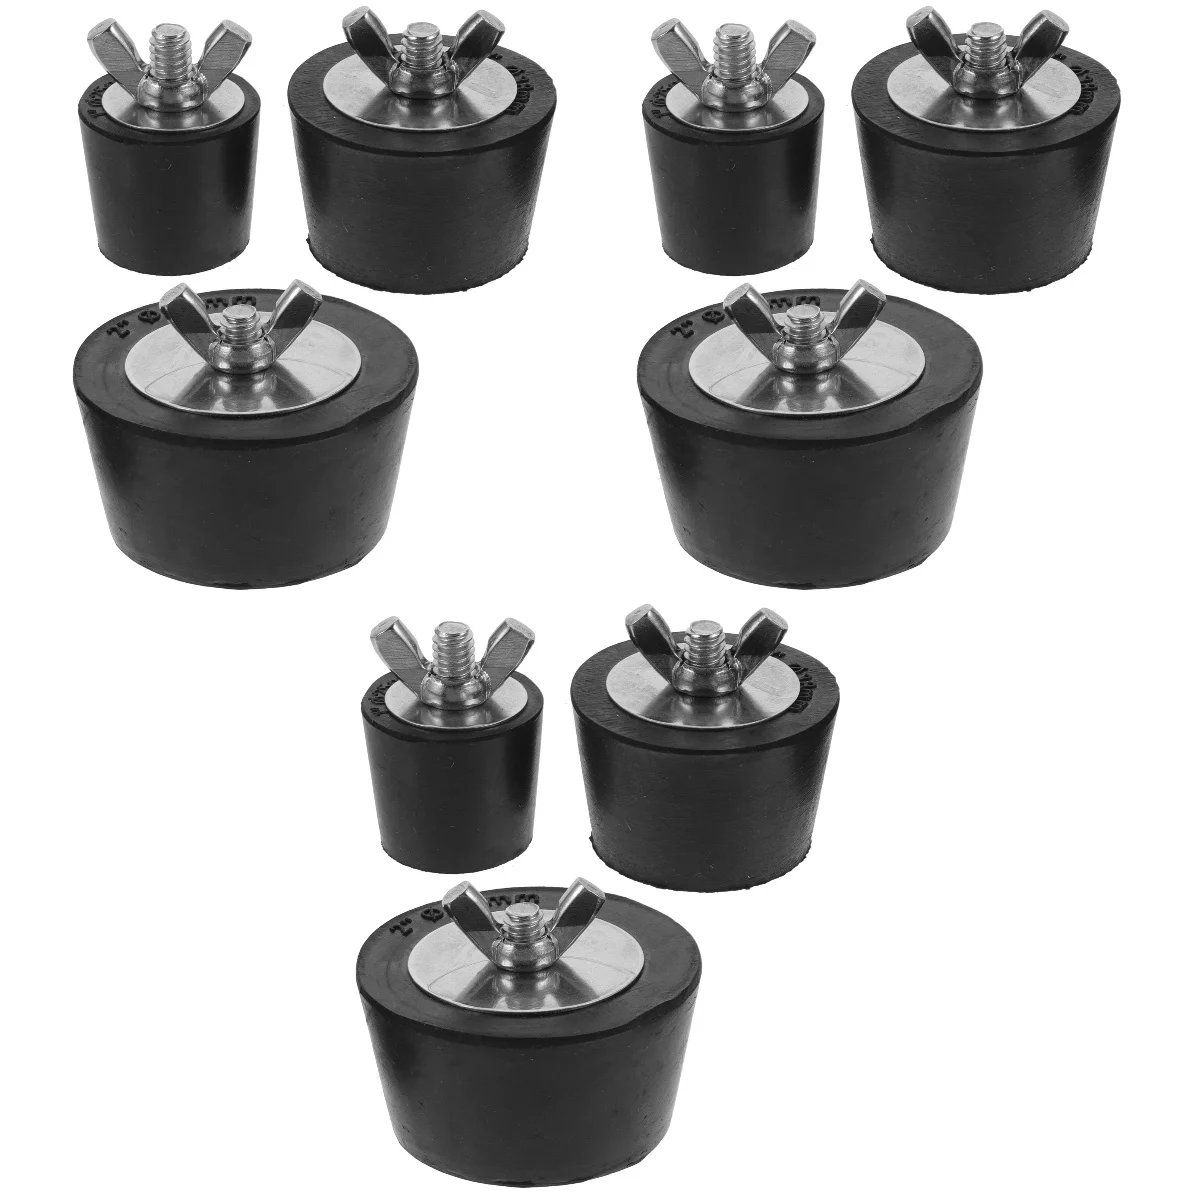 

Swimming Pool Drain Plug Winterizing Heavy Duty Plugs Replacement Return Screw Ground Stoppers Rubber